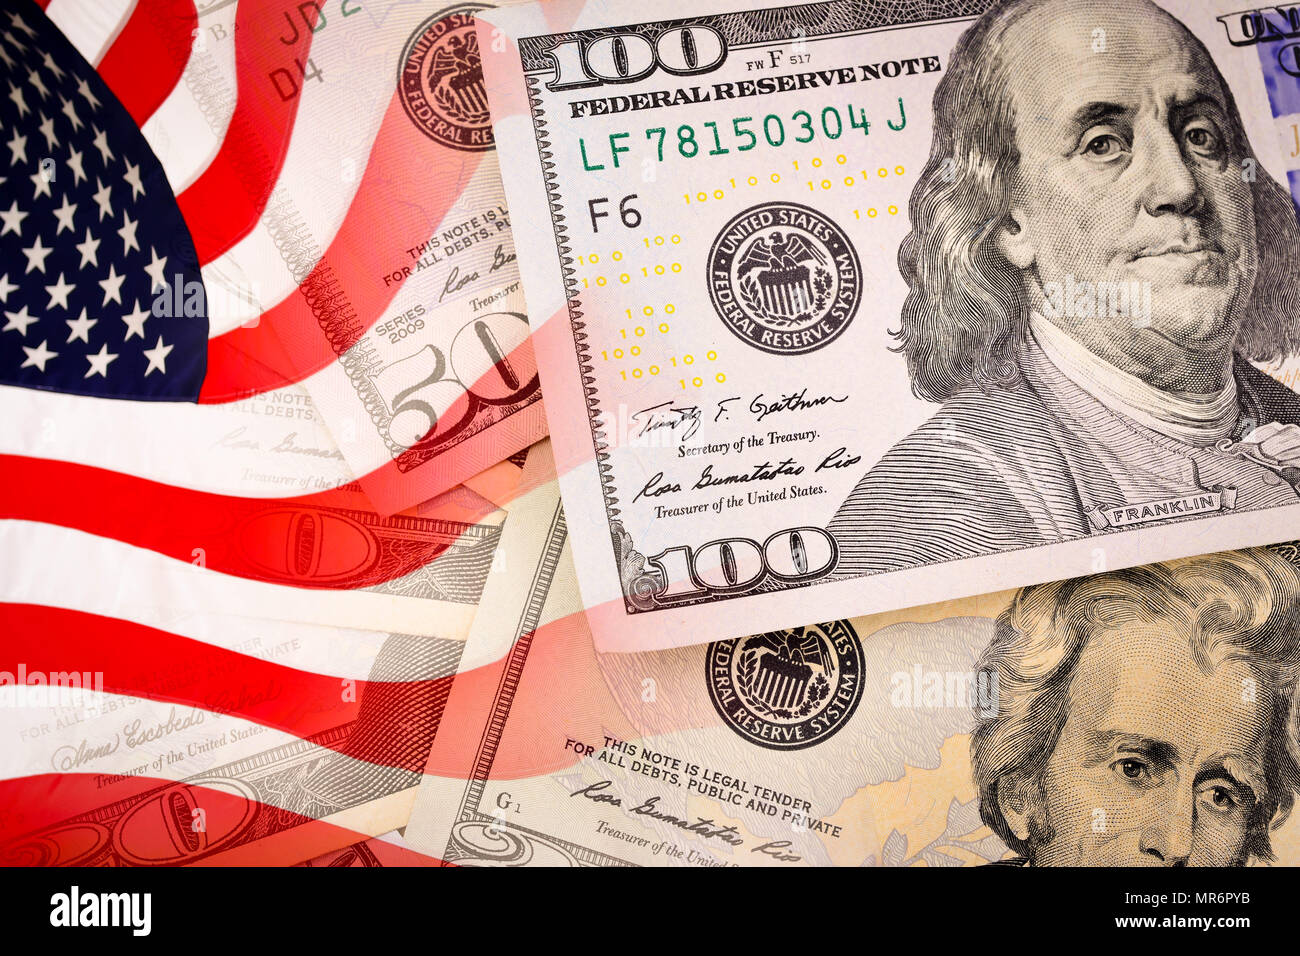 American flag and banknotes (USD) currency money Stock Photo